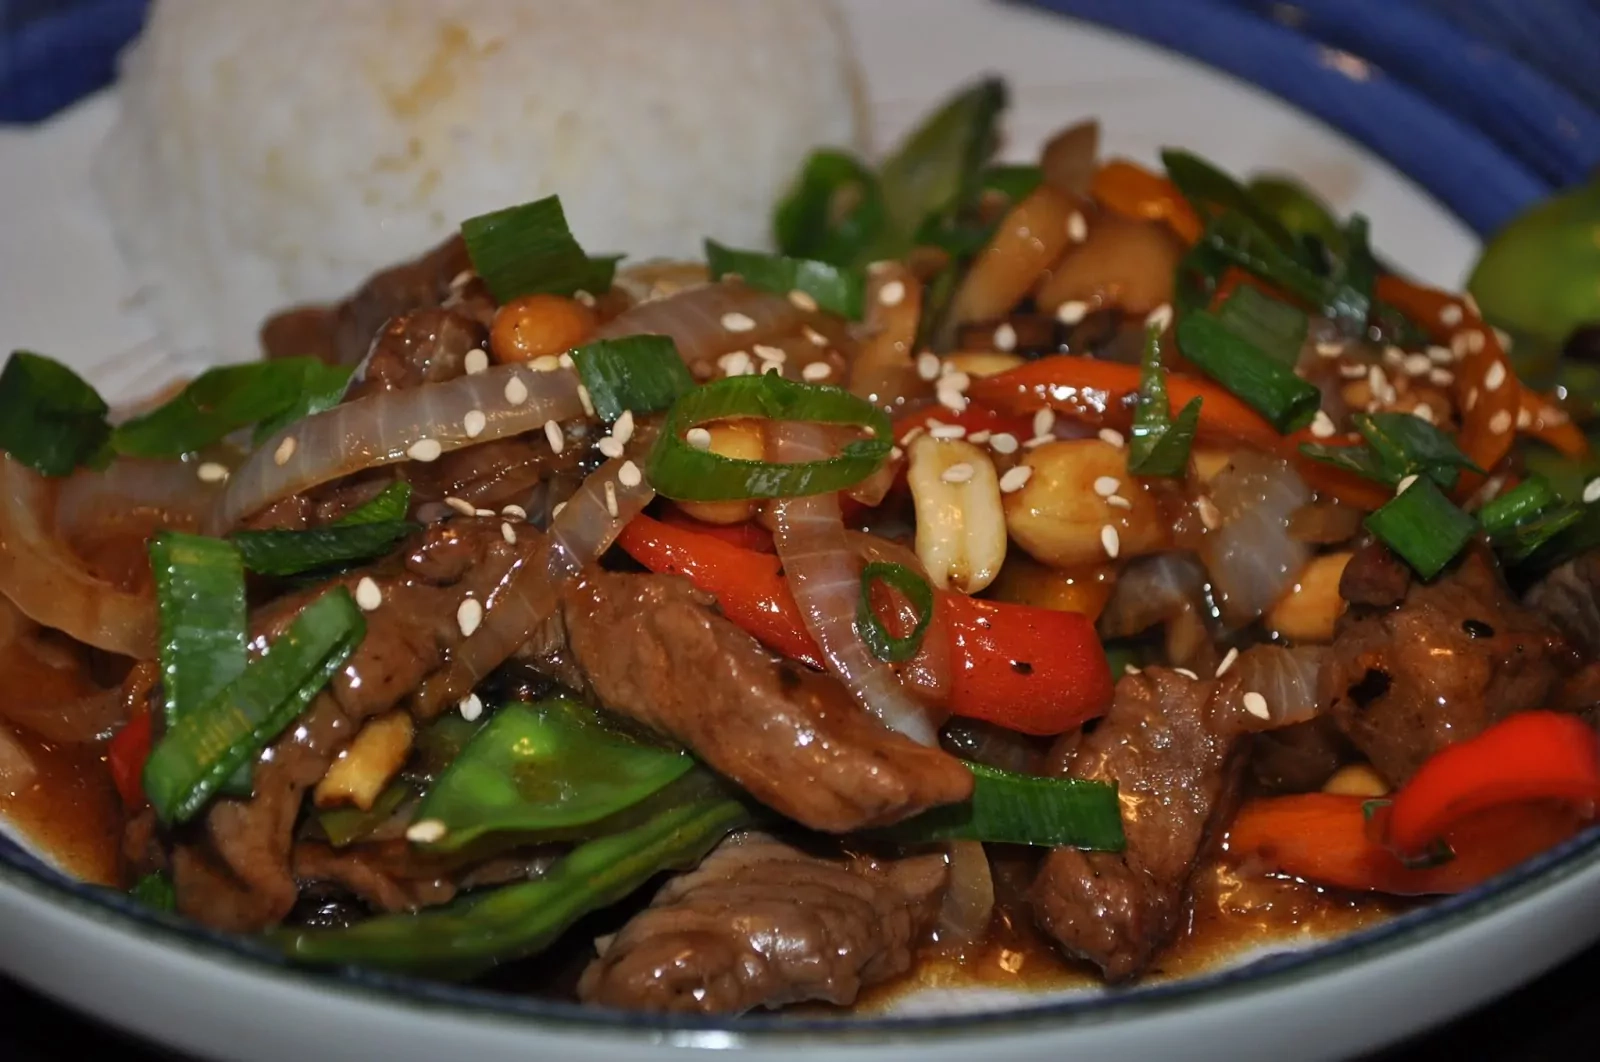 Beef in Chinese: Beef and vegetable stir-fry and teriyaki sauce | Recipe